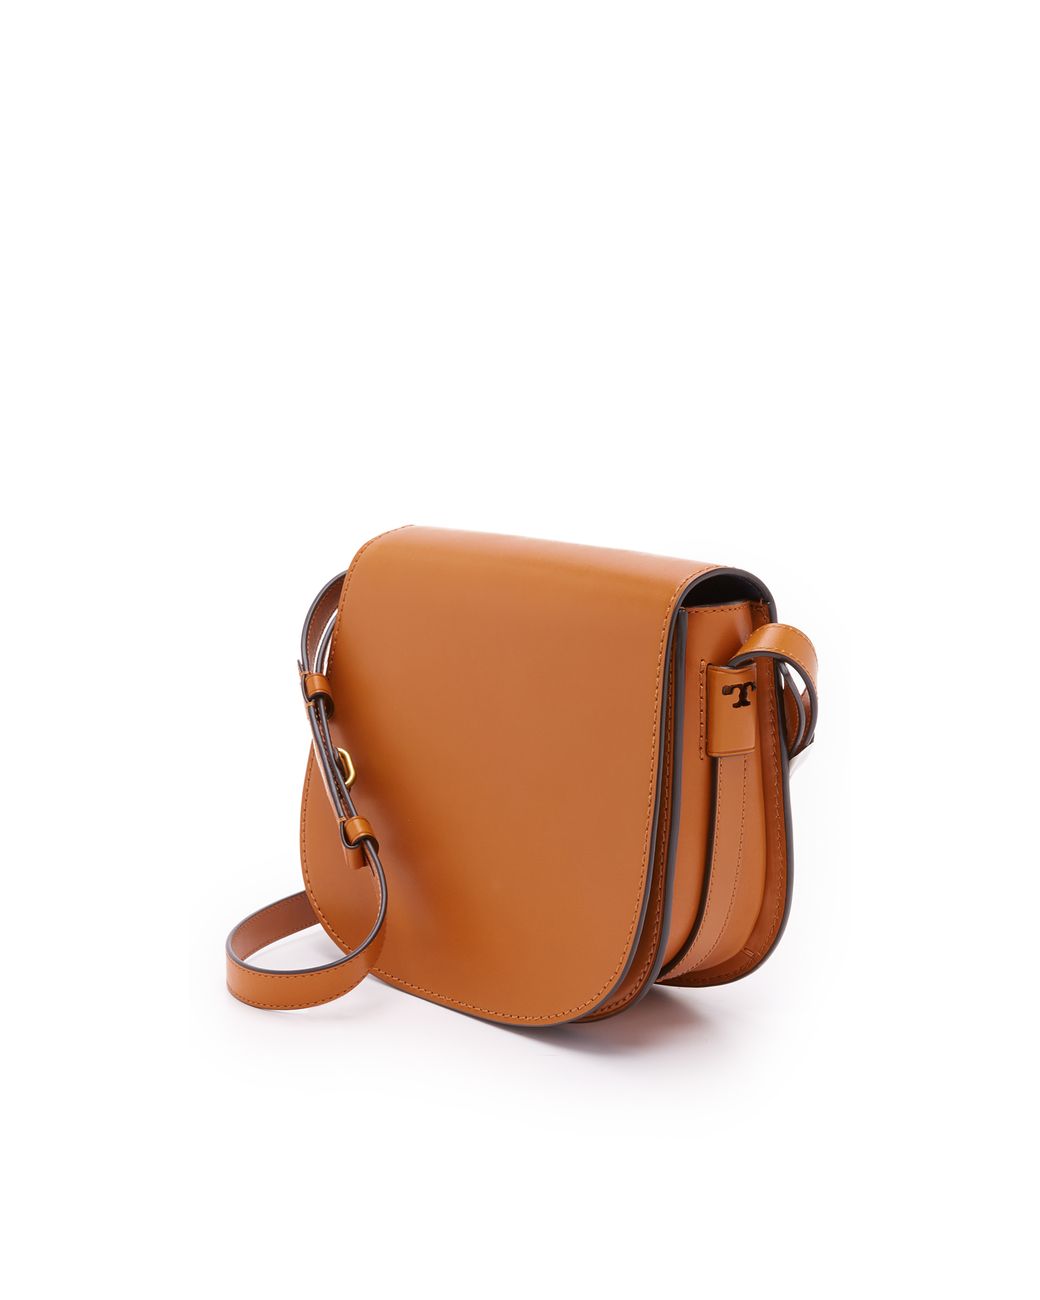 Tory Burch Leather Saddle Bag in Brown | Lyst